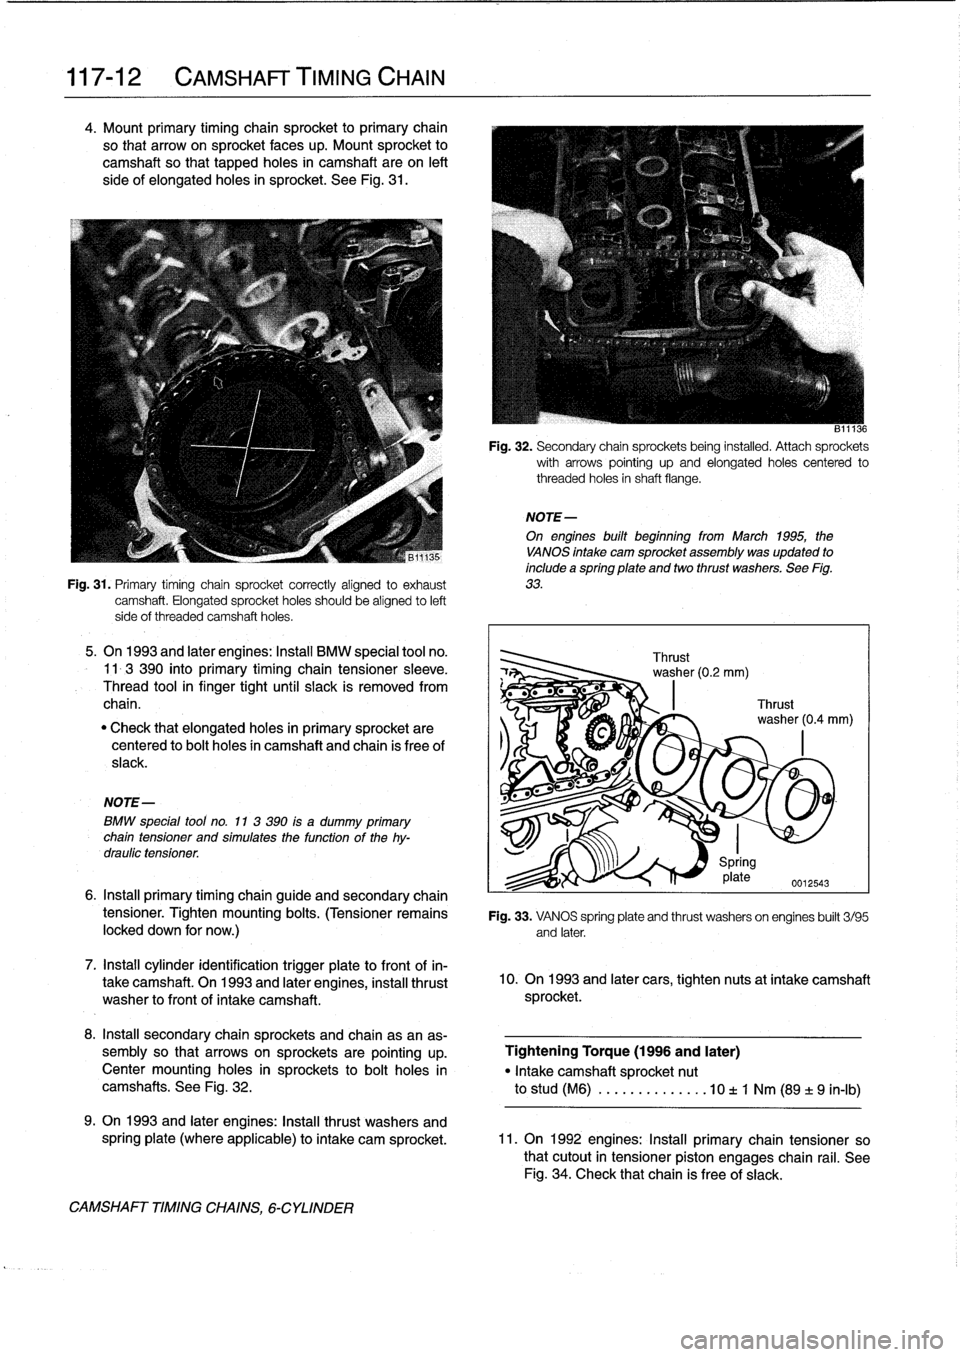 BMW M3 1993 E36 Owners Guide 
117-
1
2

	

CAMSHAFT
TIMING
CHAIN

4
.
Mount
primary
timing
chain
sprocket
to
primary
chain

so
that
arrowon
sprocket
faces
up
.
Mount
sprocket
to

camshaftso
that
tapped
holes
in
camshaftare
on
lef